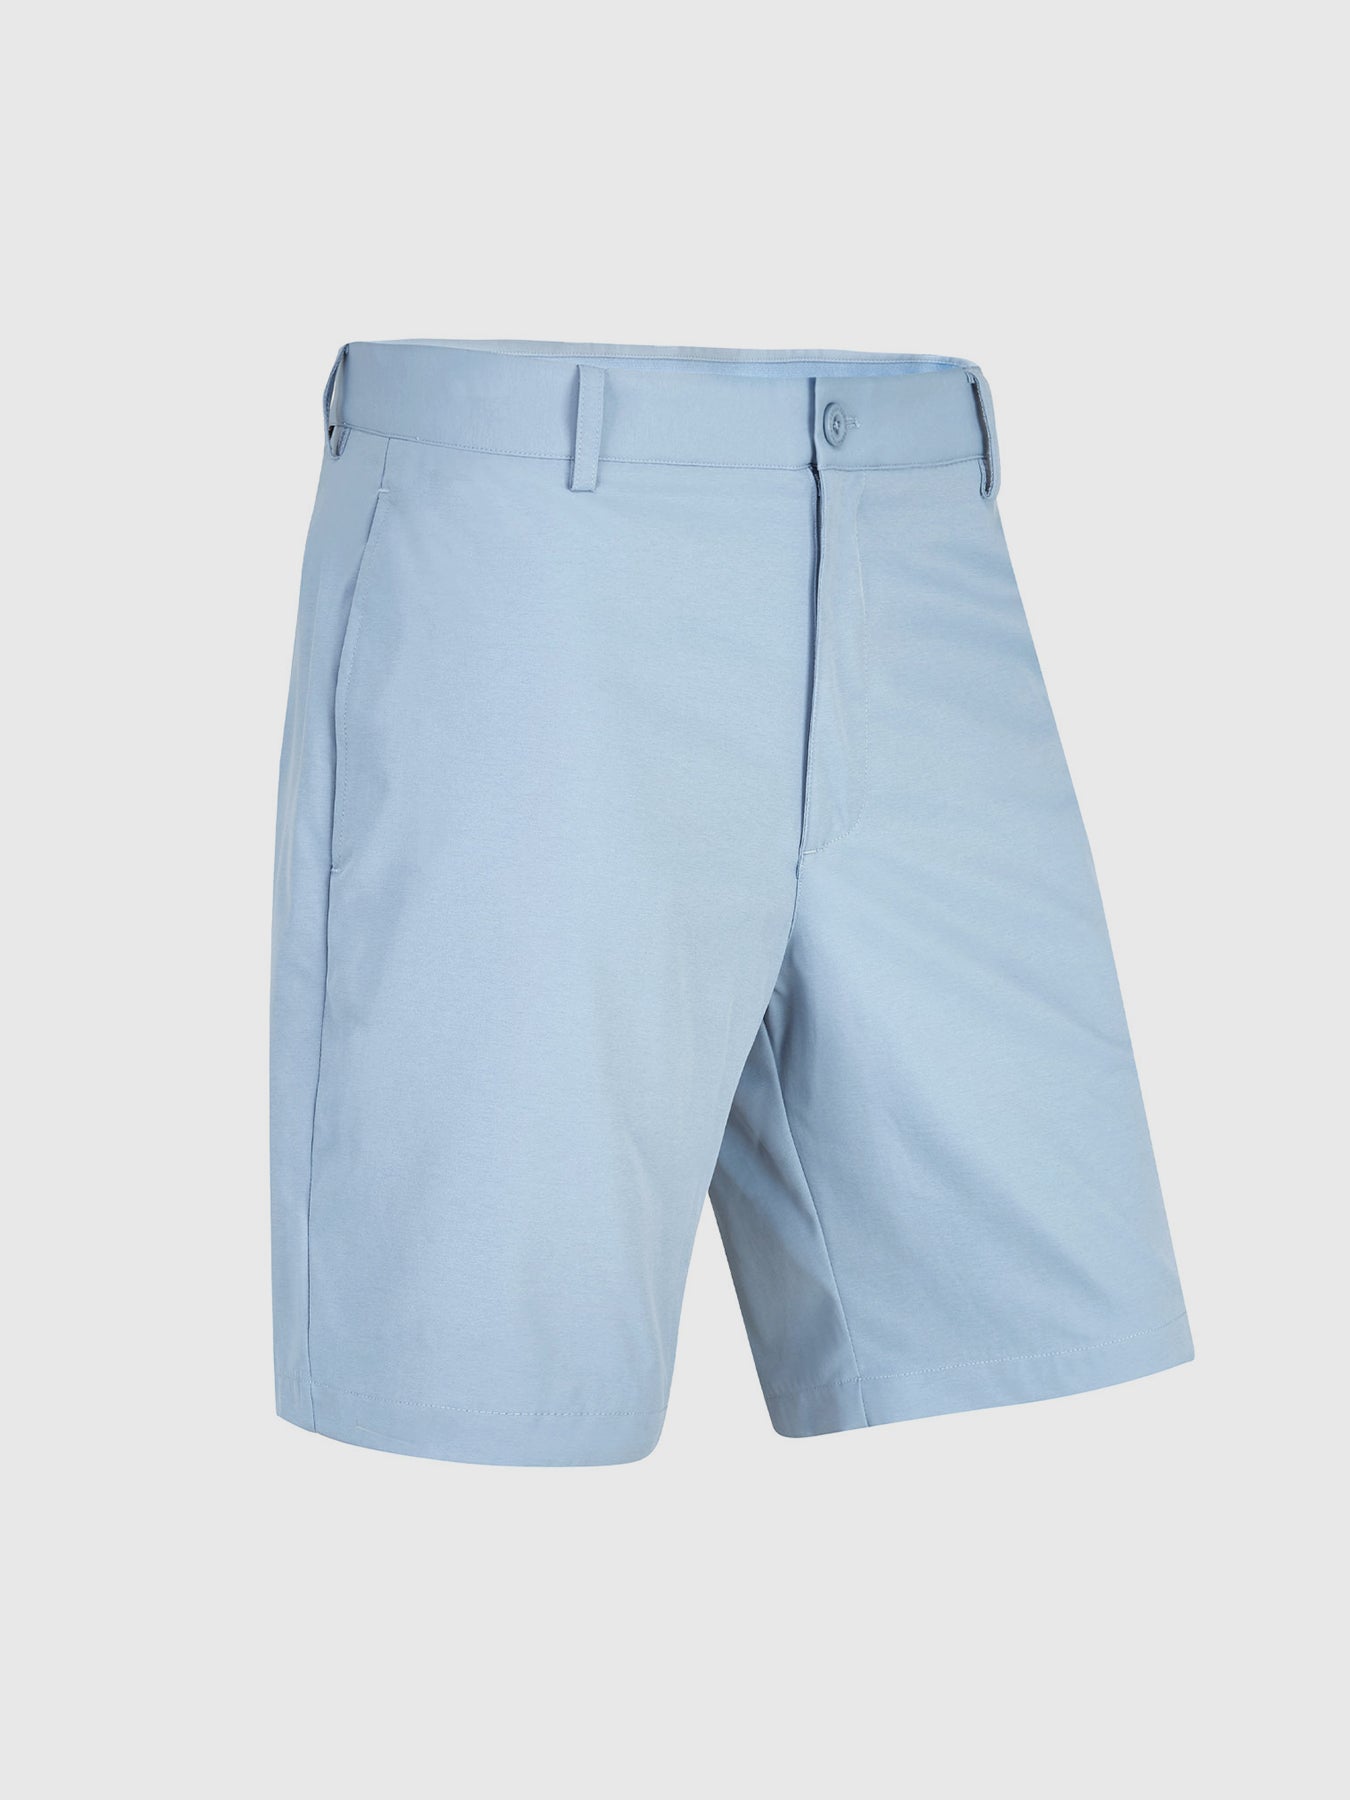 View Jester Performance Piped Golf Shorts In Blue Grey information